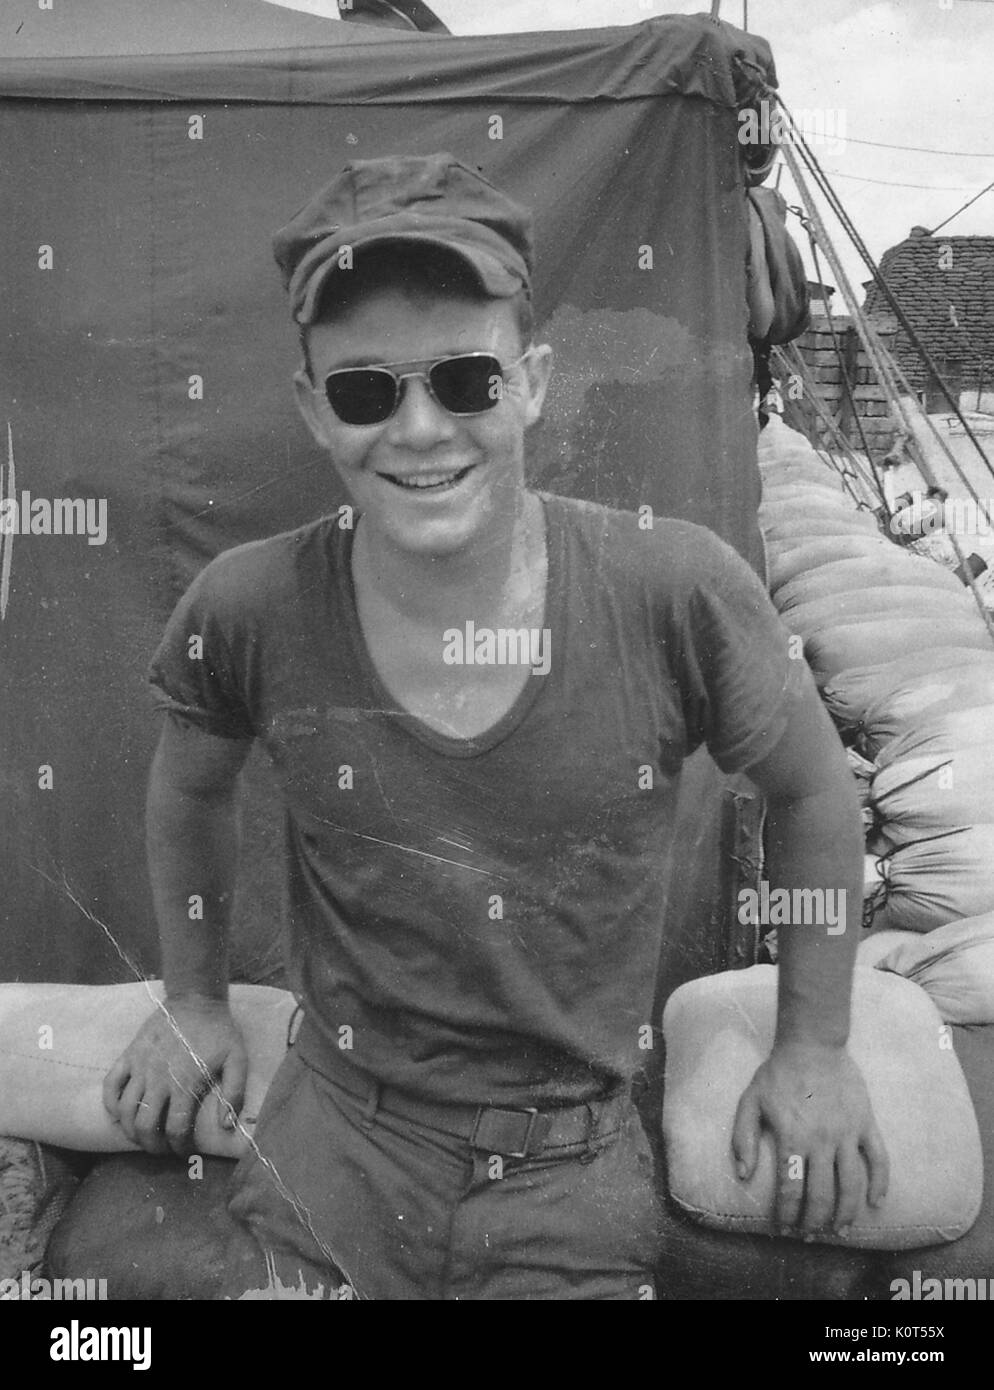 A photograph a United States Army serviceman wearing sunglasses and smiling while leaned back against a pile of sandbags, Vietnam, 1967. Stock Photo